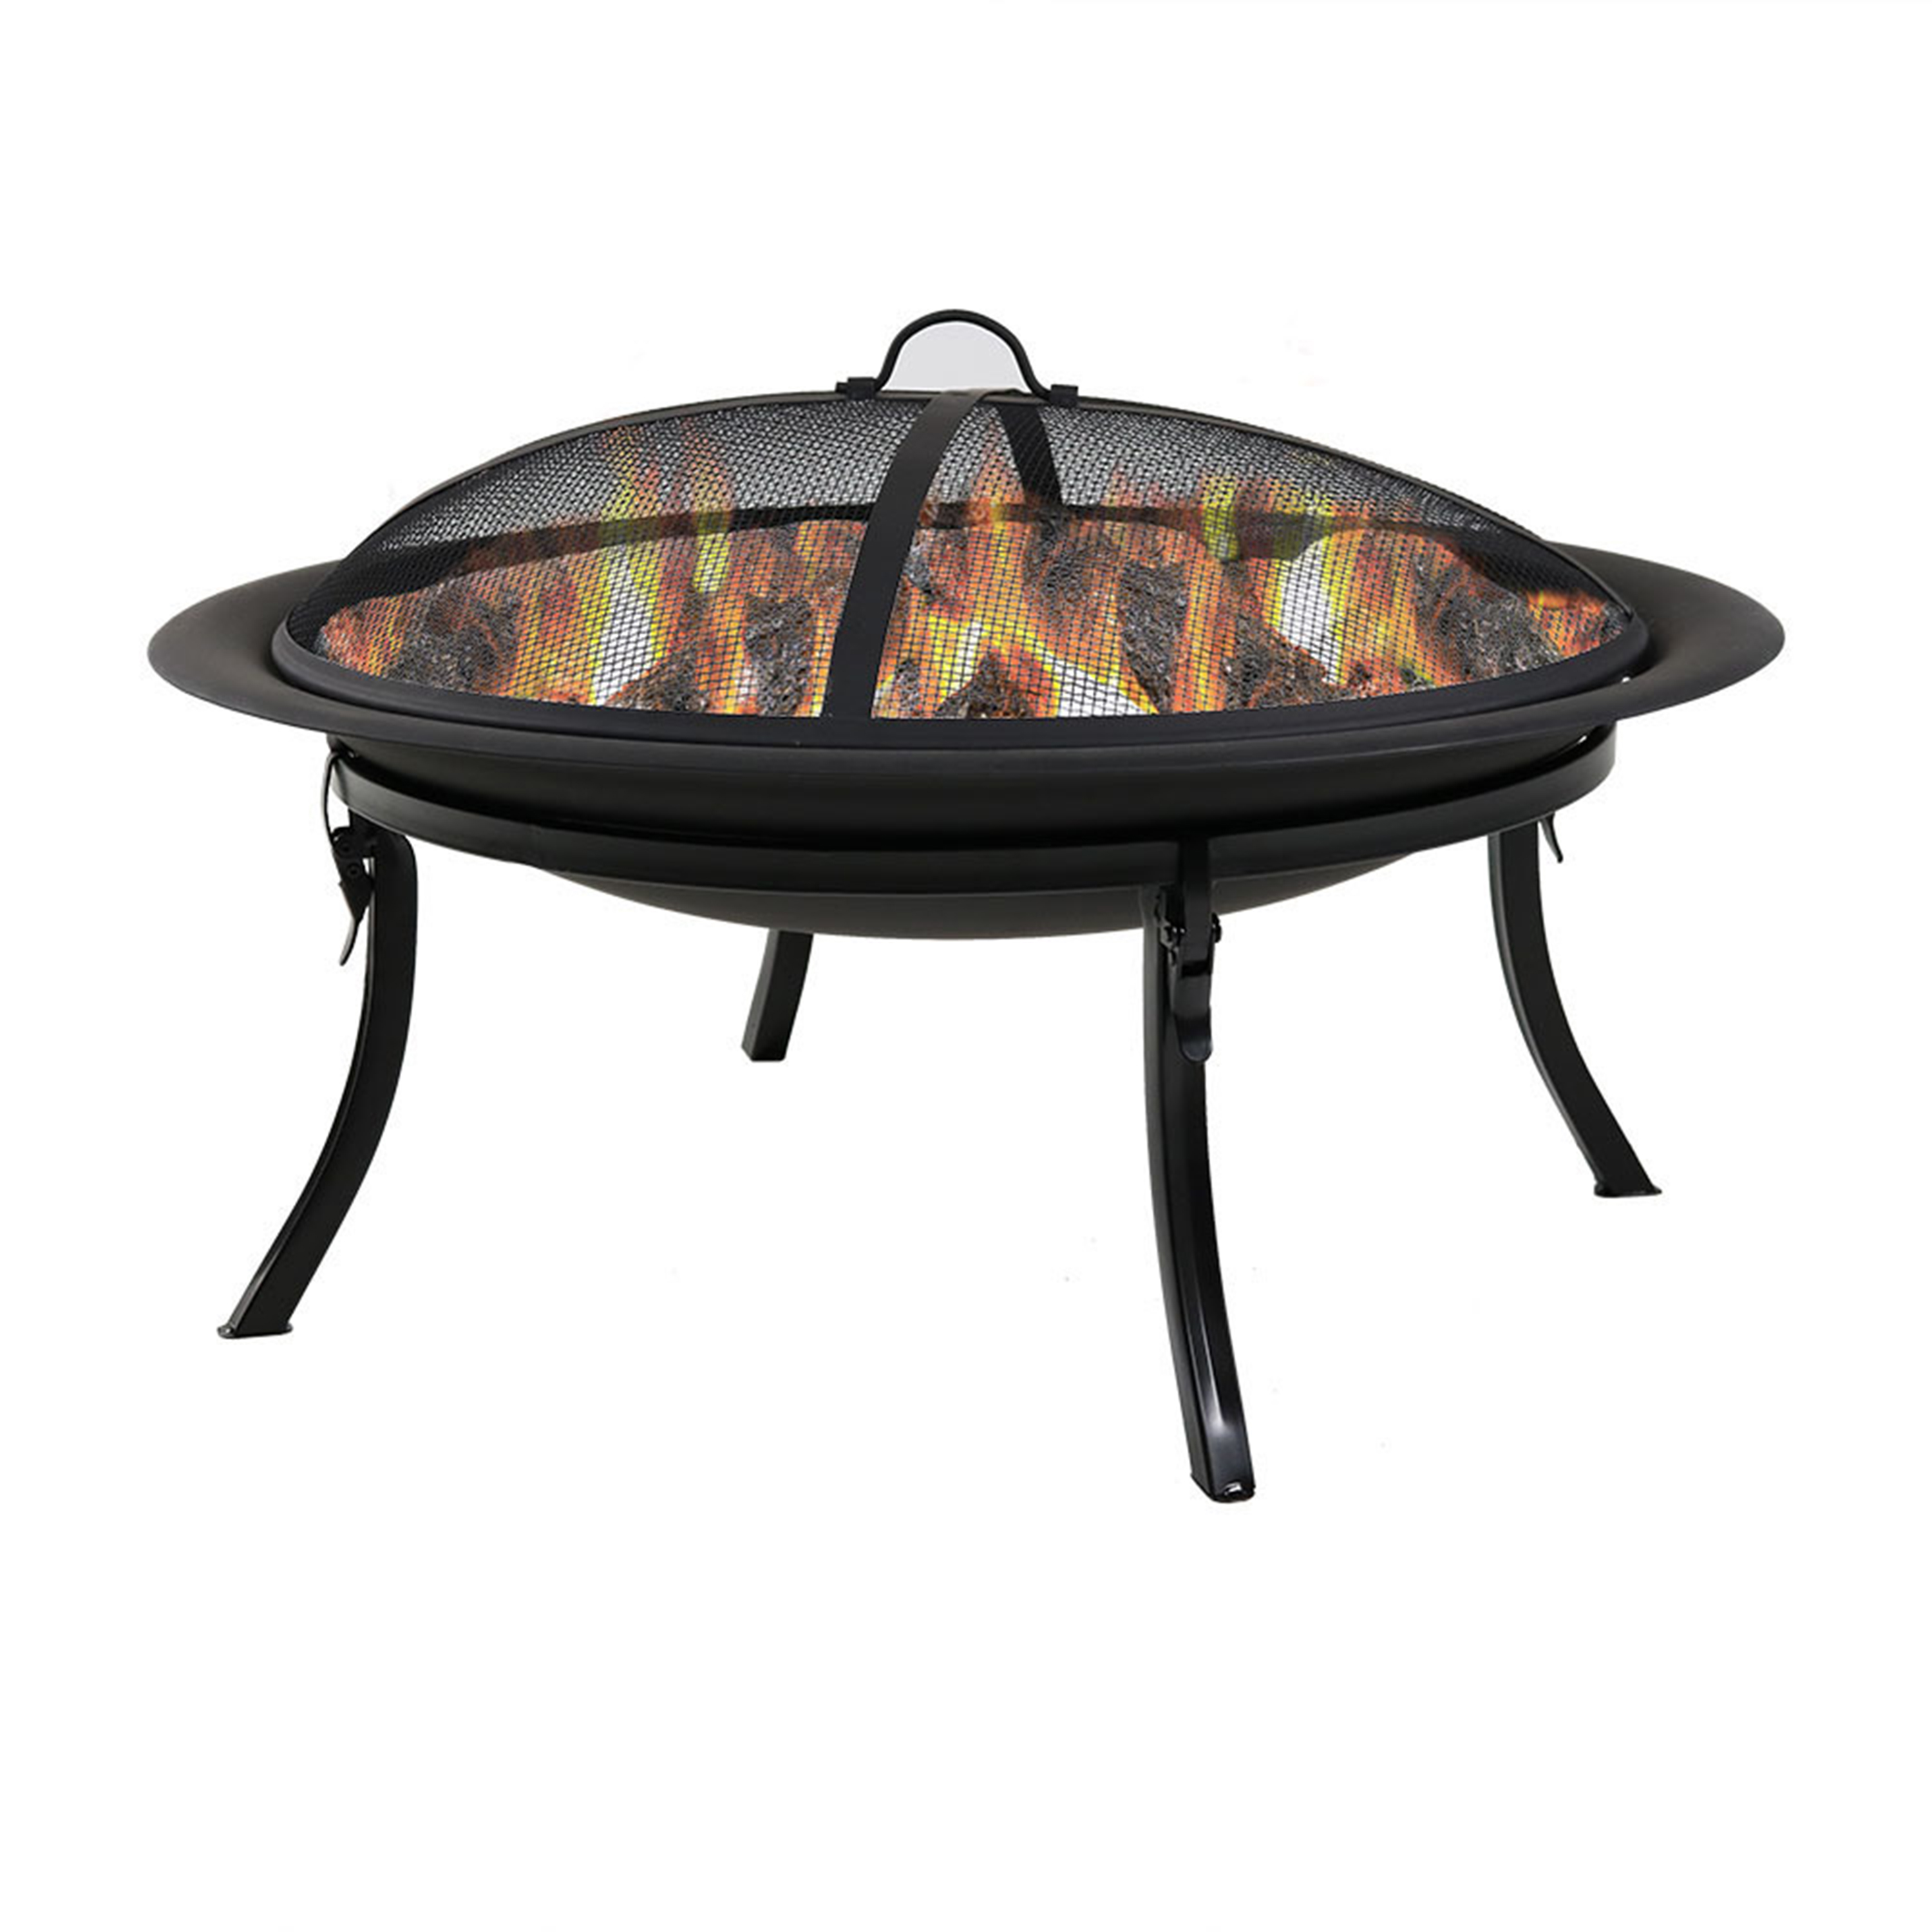 Sunnydaze Folding Fire Pit with Carrying Case &amp; Spark Screen - 29-Inch